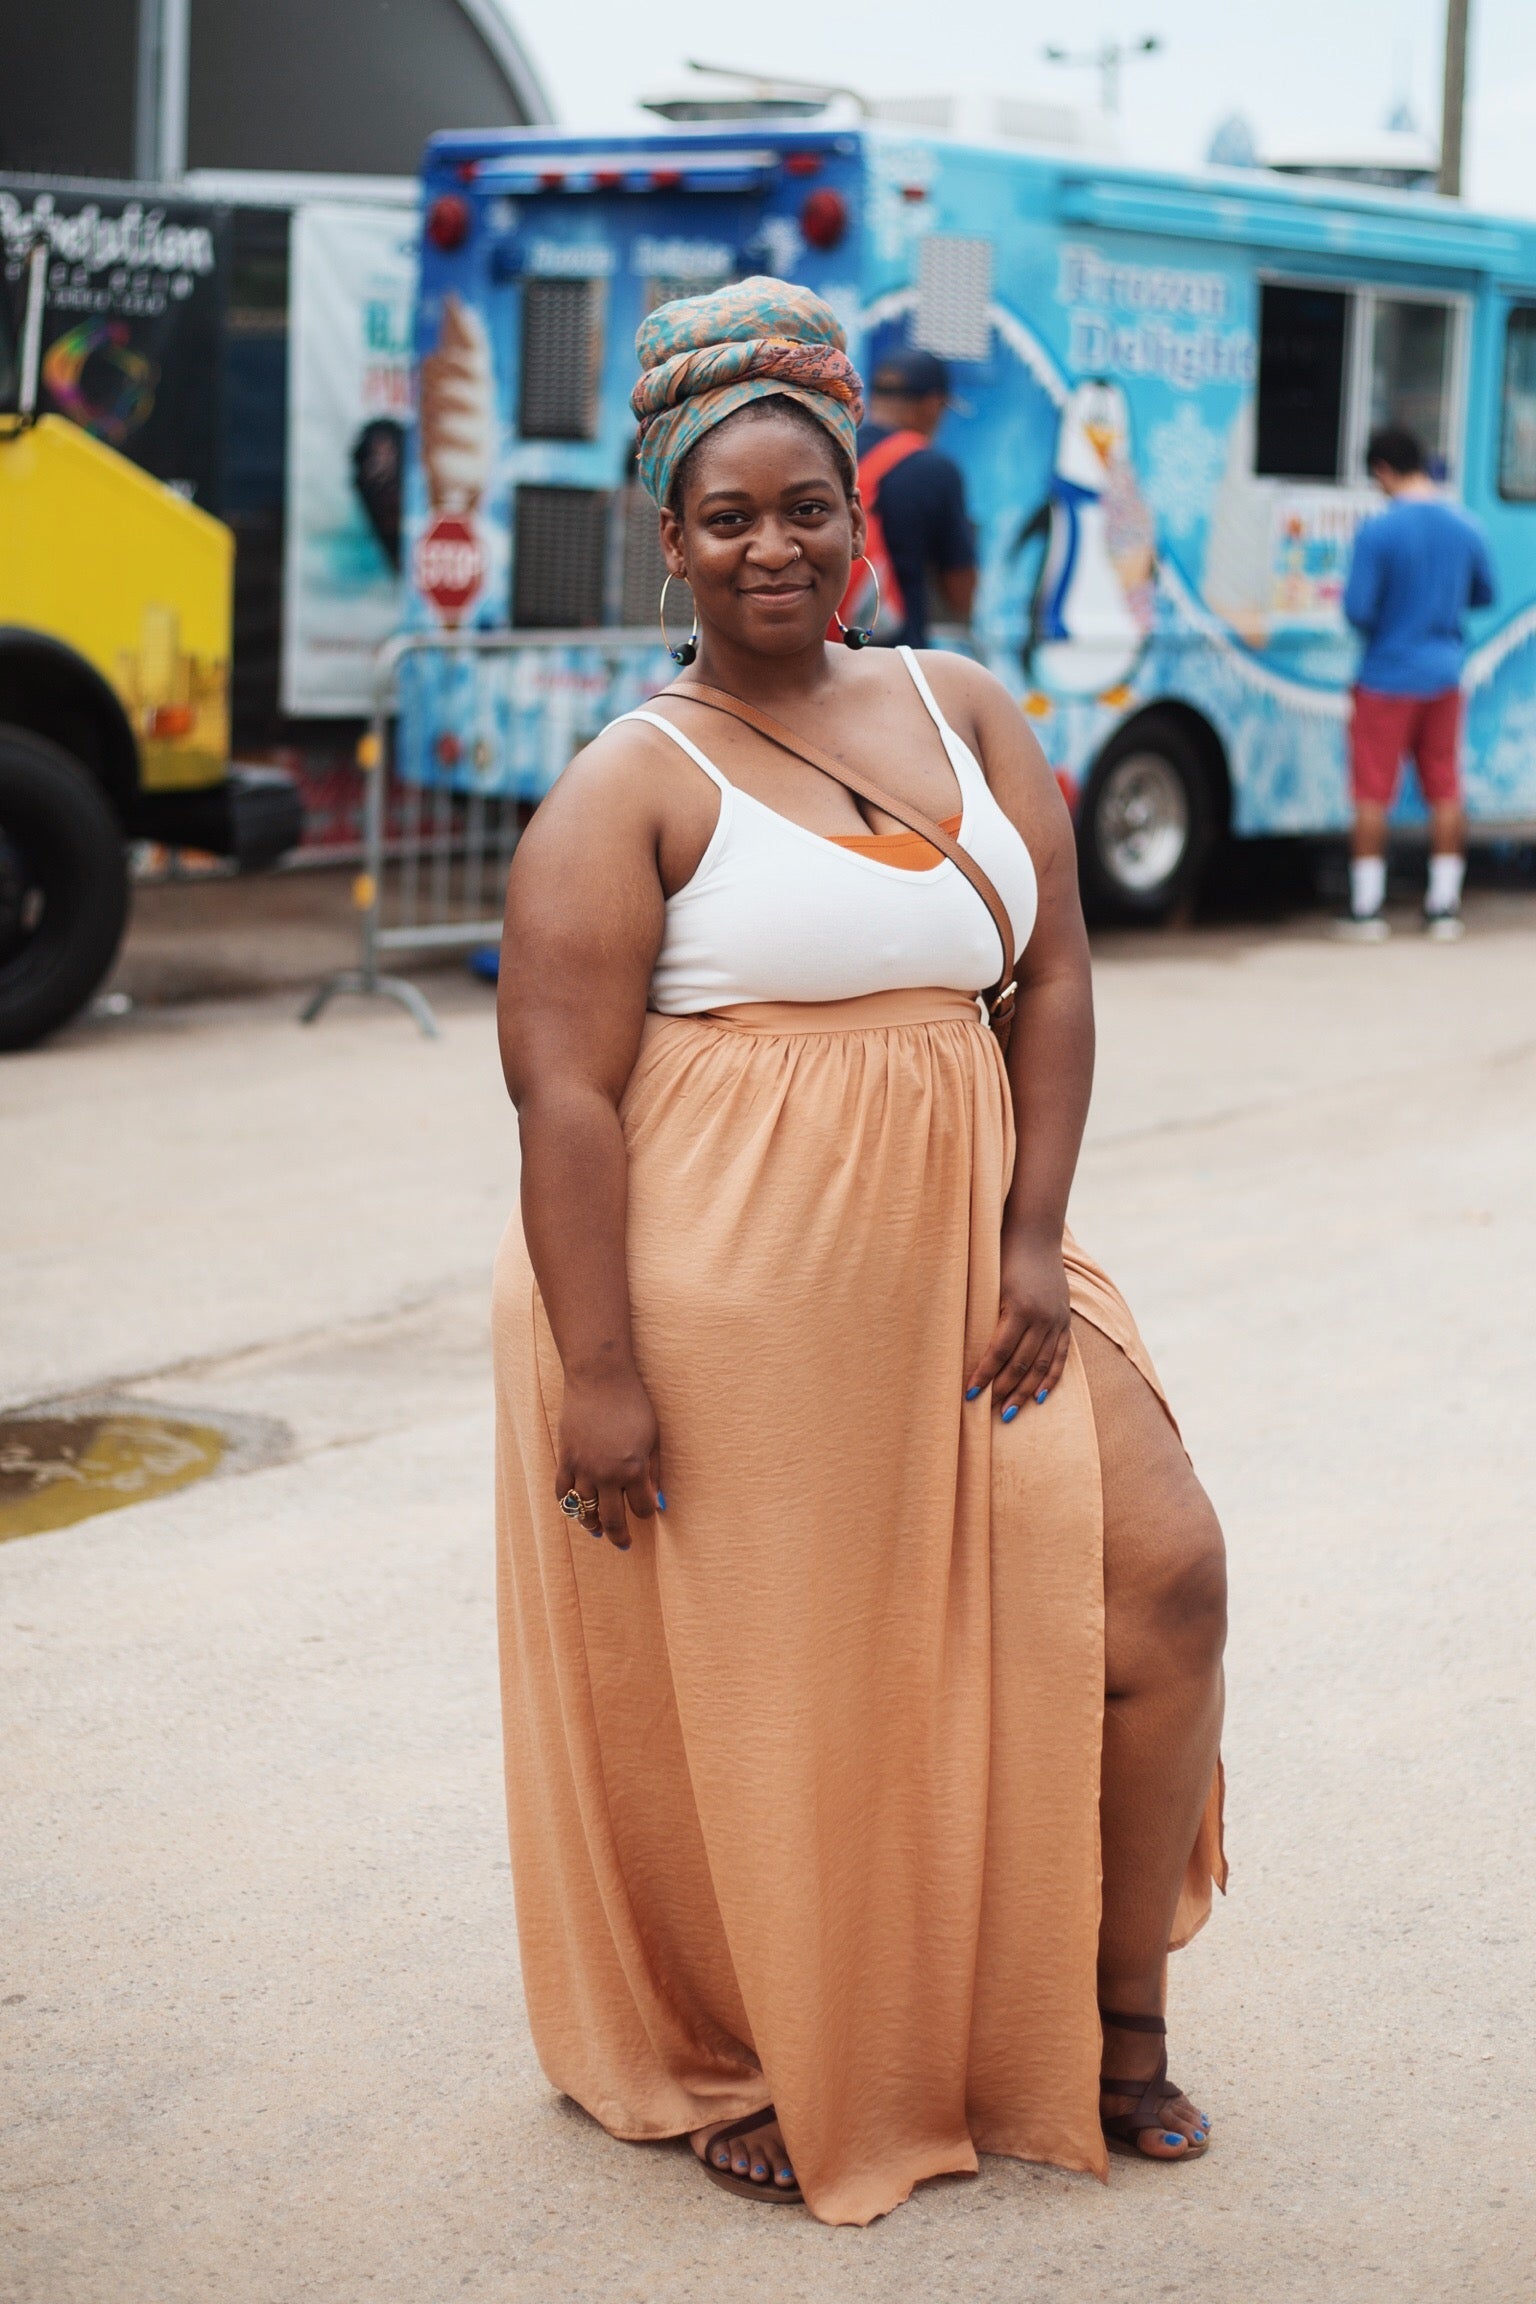 Everyone Looked Amazing At The 2018 Roots Picnic
